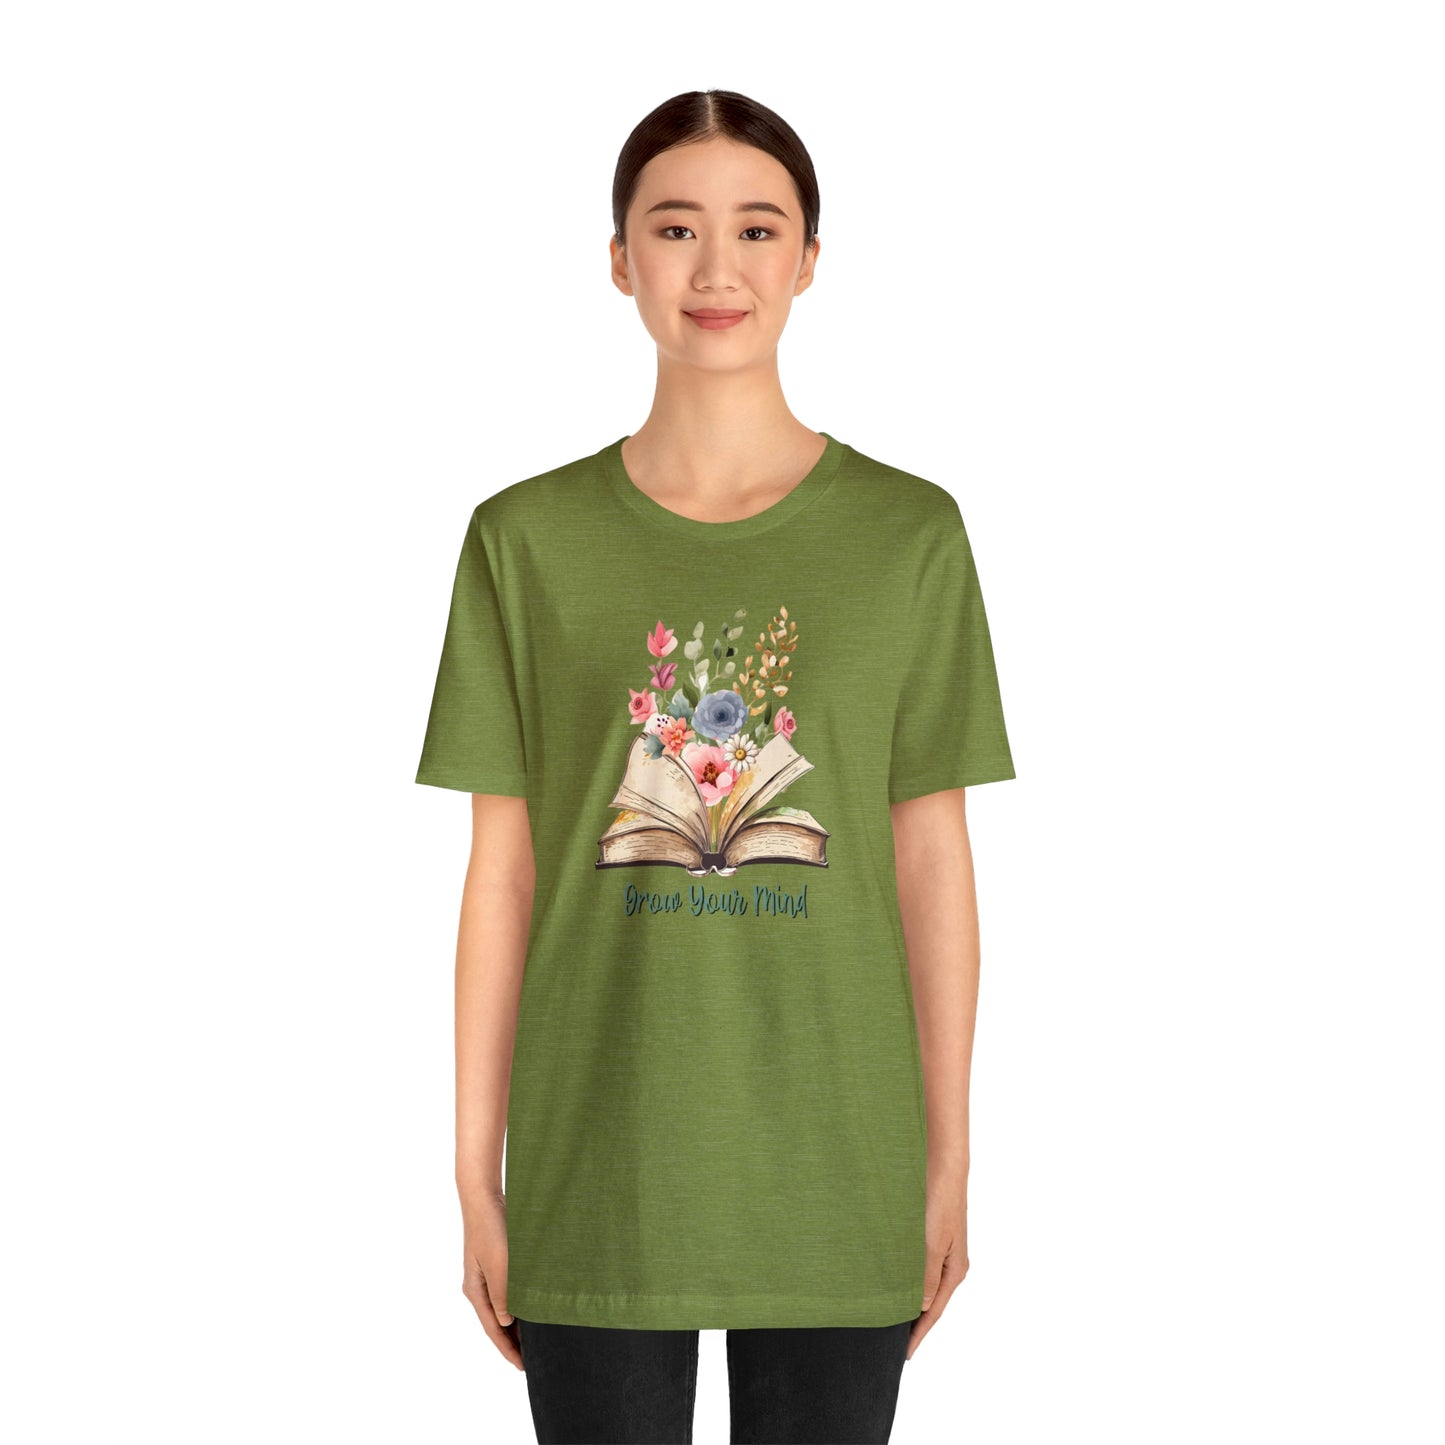 Unisex Jersey Short Sleeve Tee, Grow Your Mind Book and Flowers T-Shirt